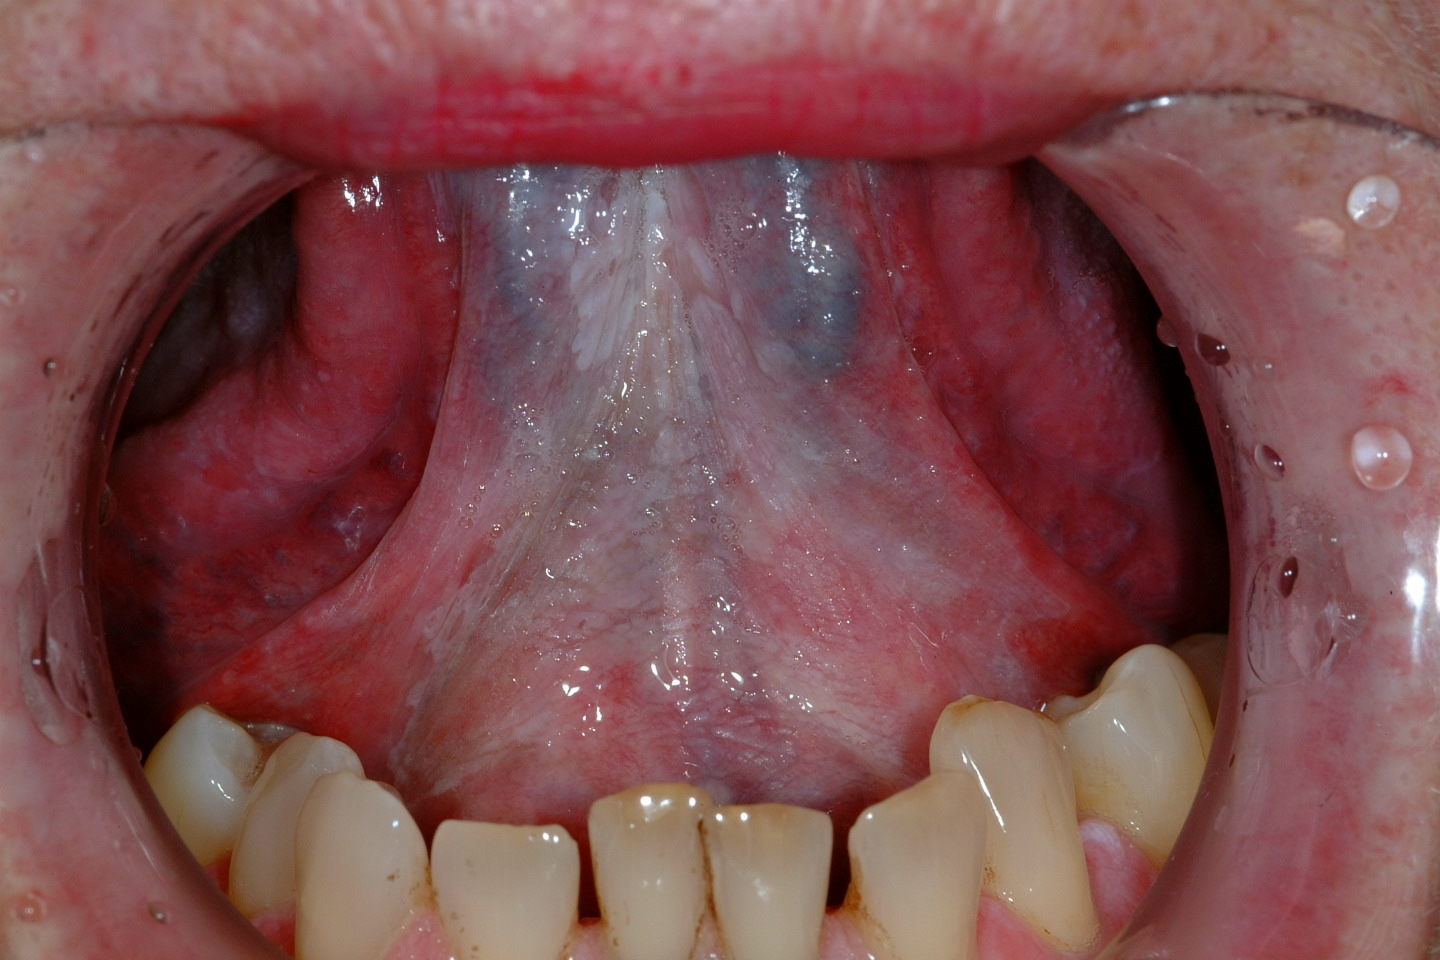 What Does Floor Of Mouth Cancer Look Like